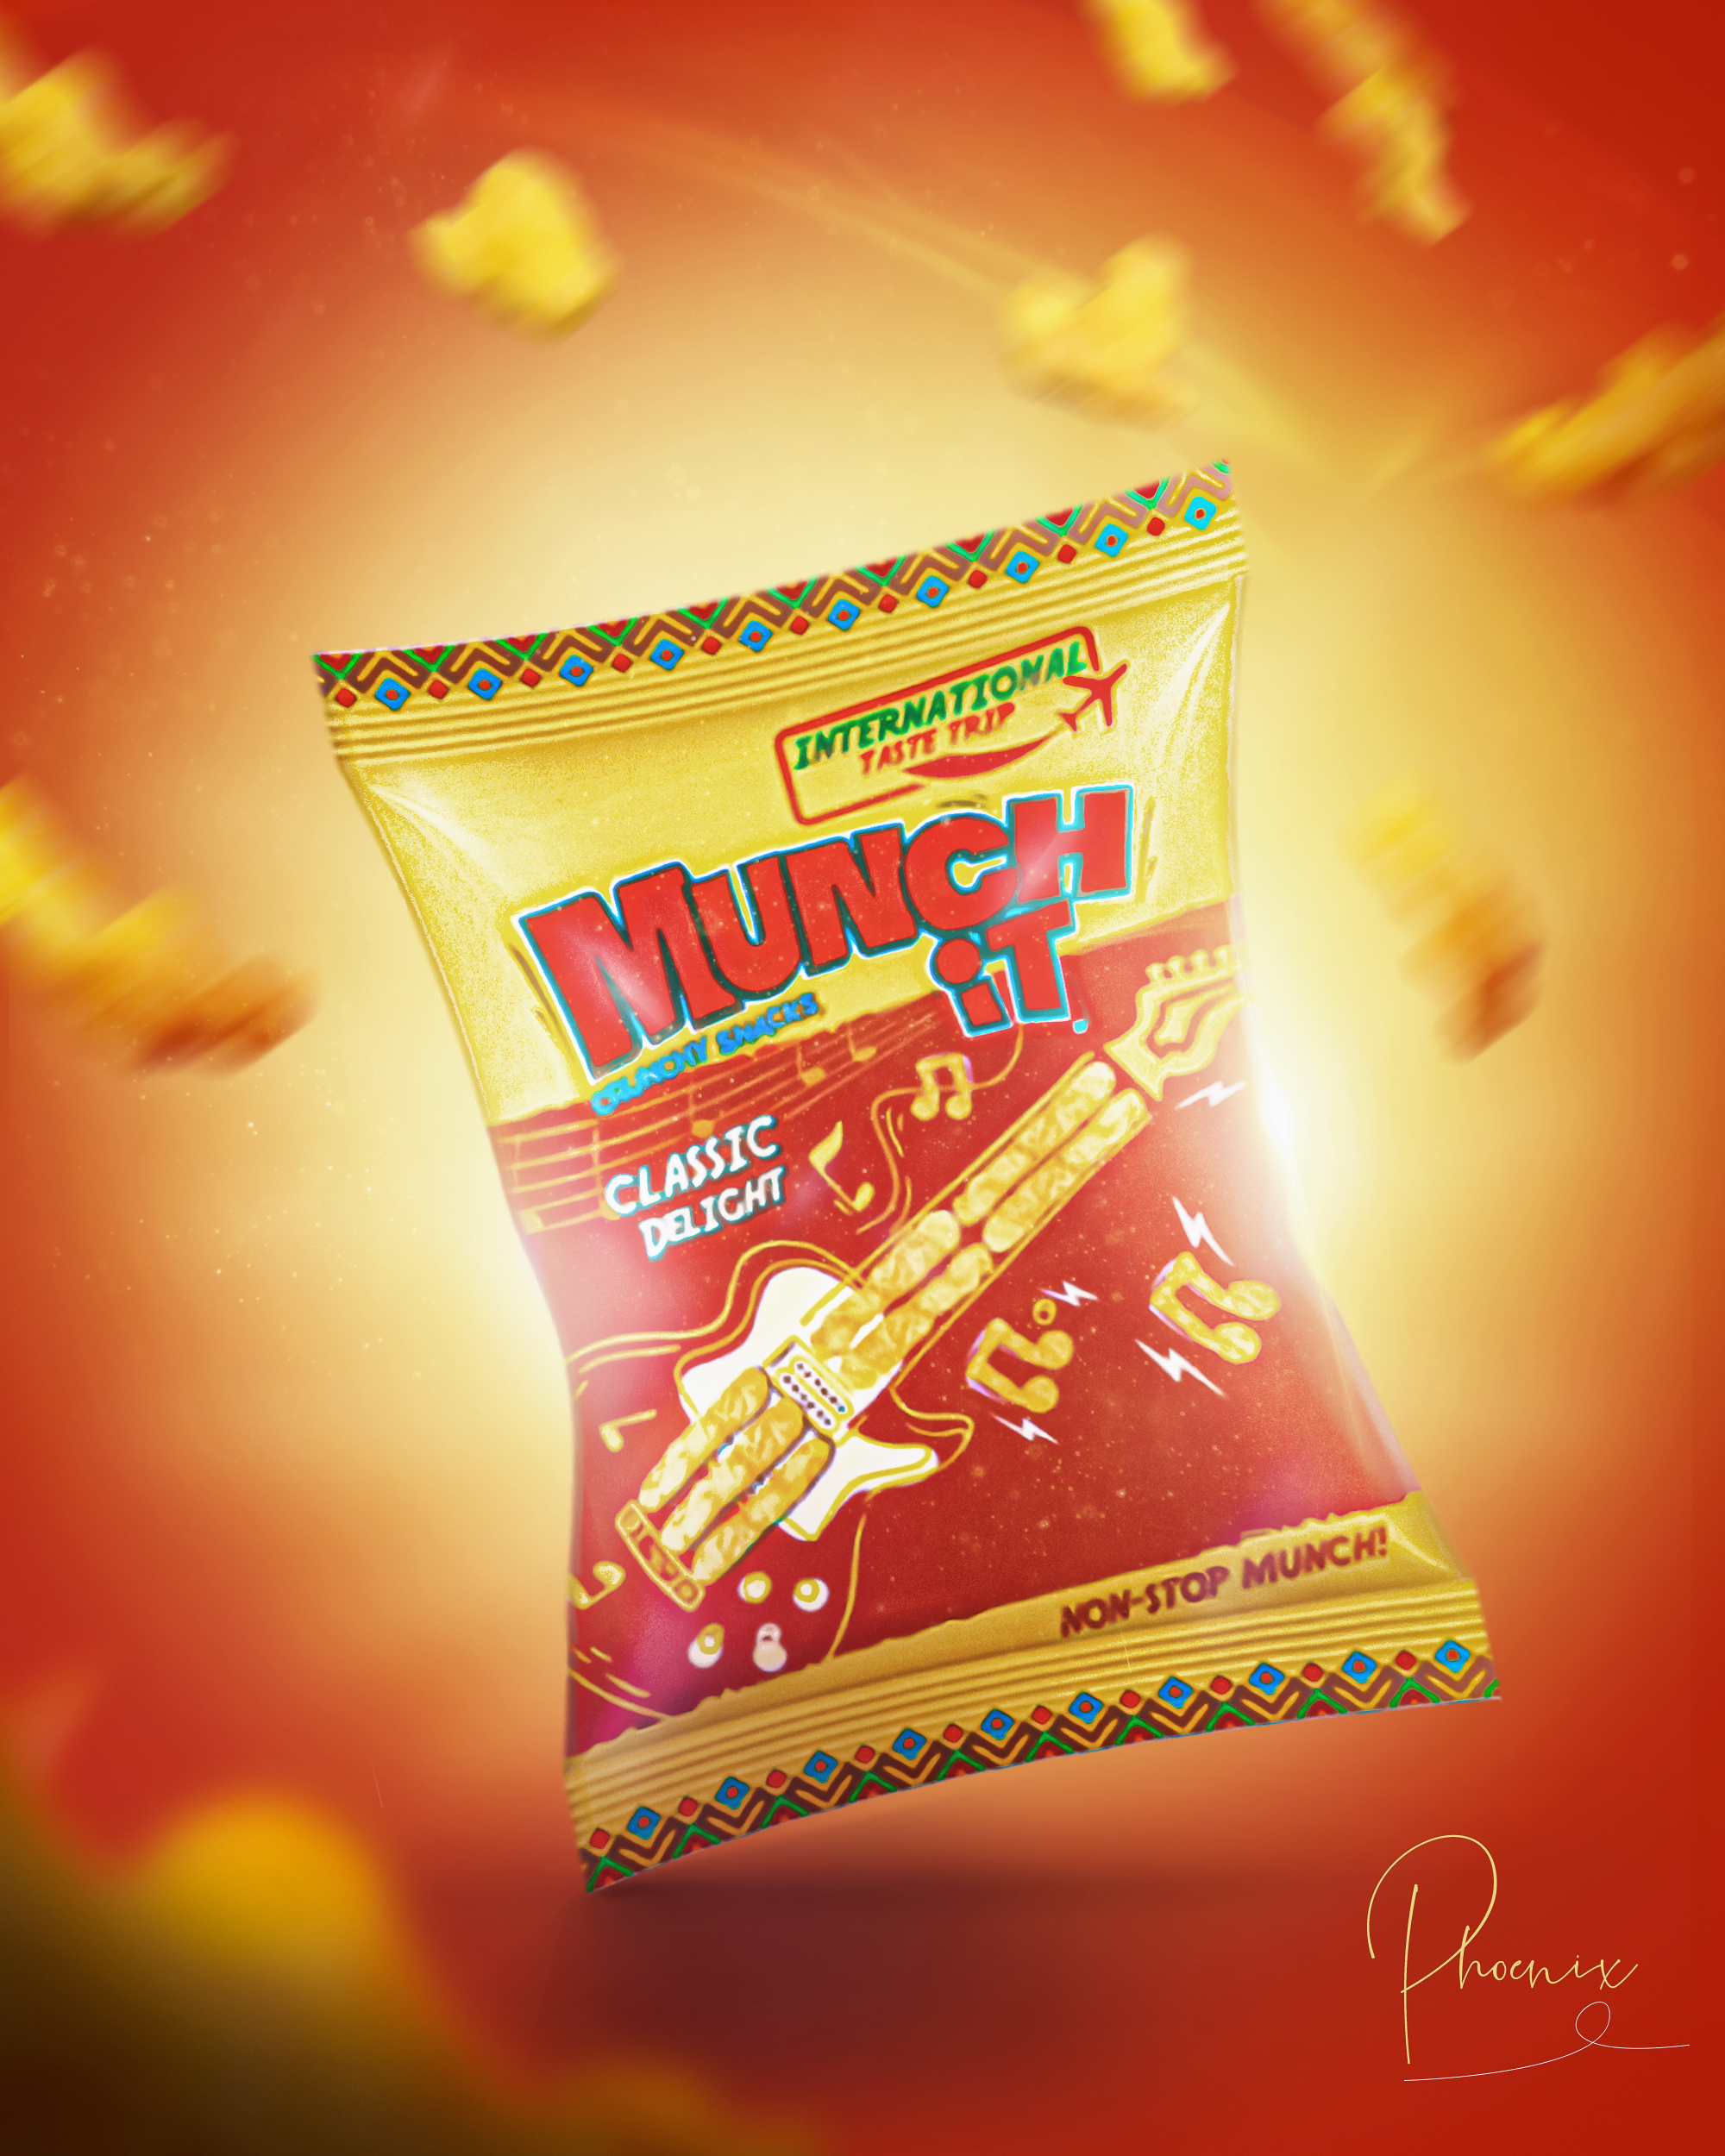 Its the weekend and I made a product ad for munch it NIgeria as it is my favorite snack.